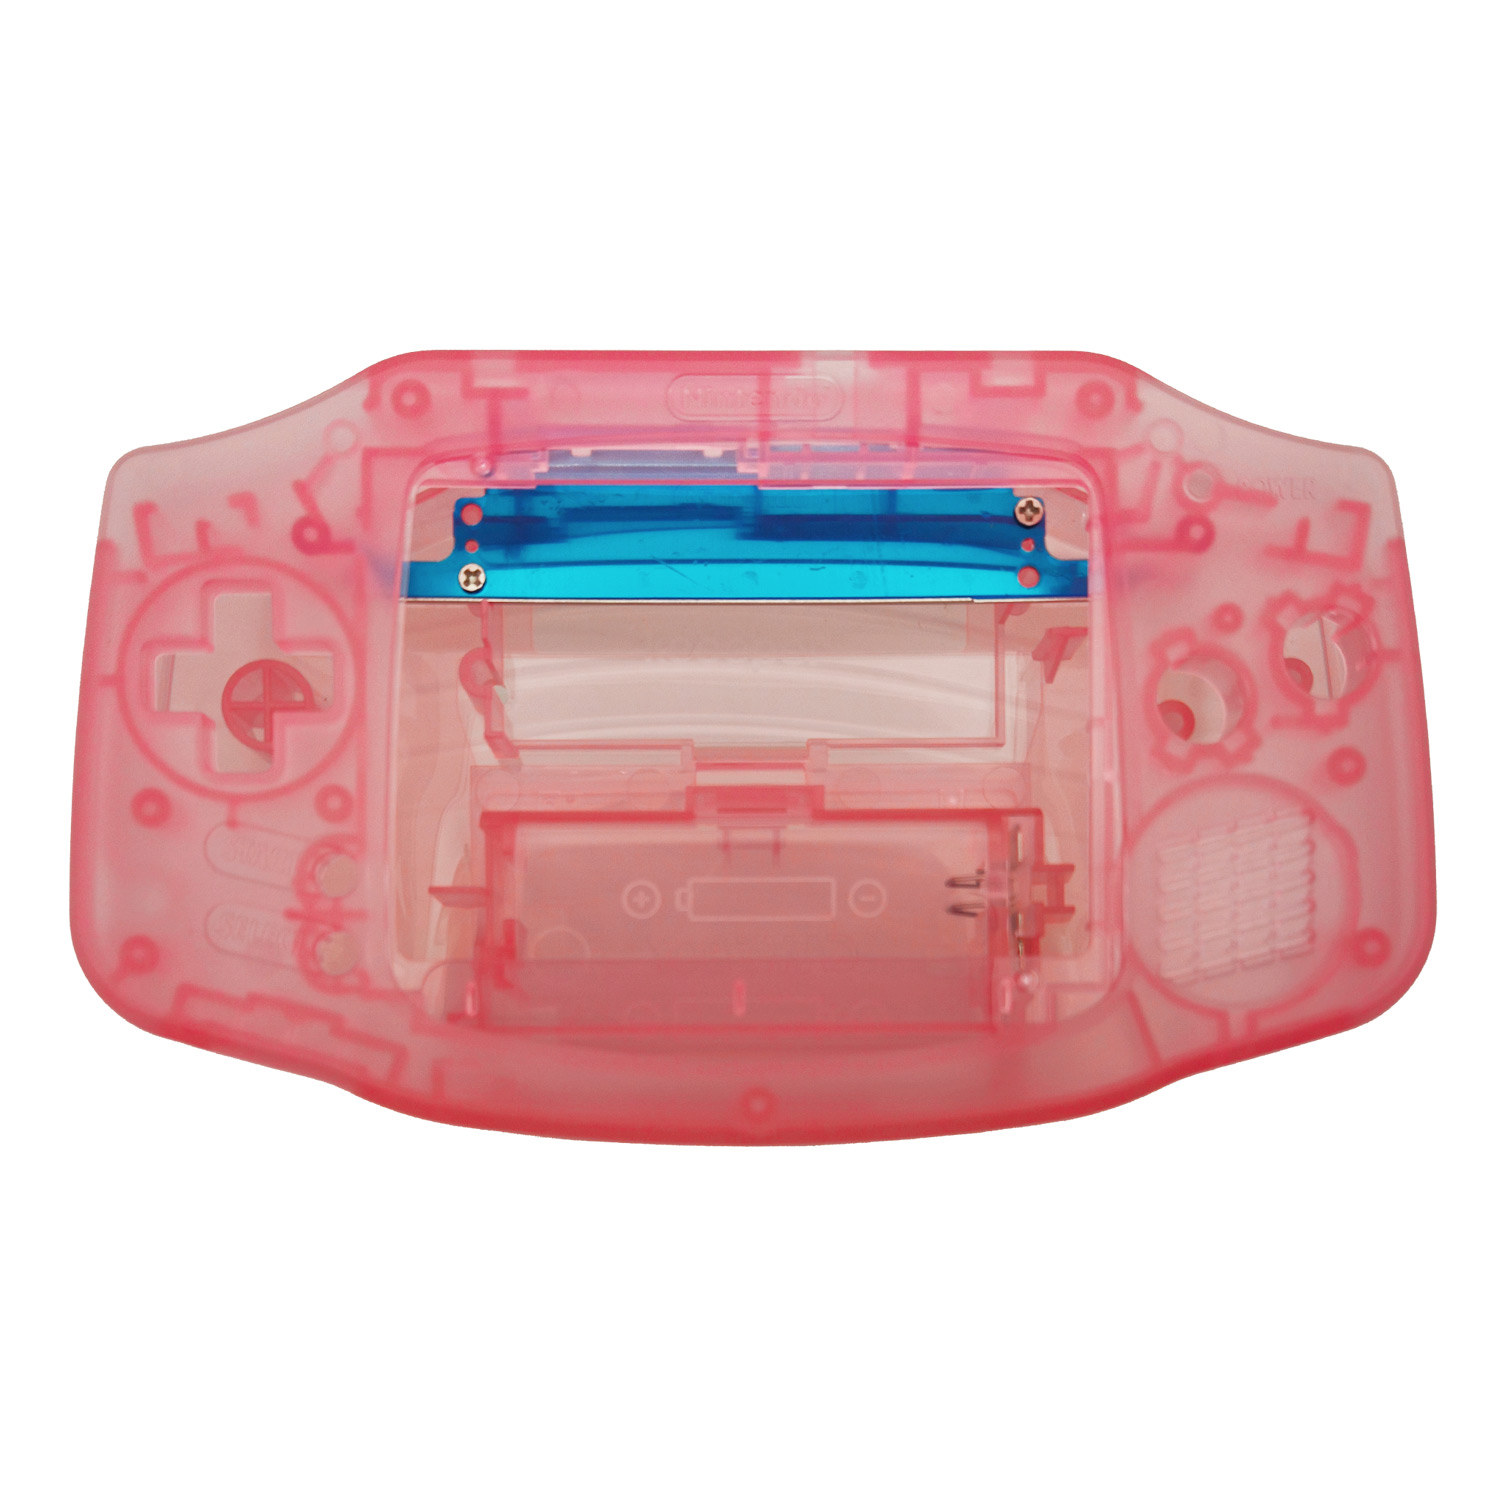 Game Boy Advance Shell (Pink Clear) - SALE